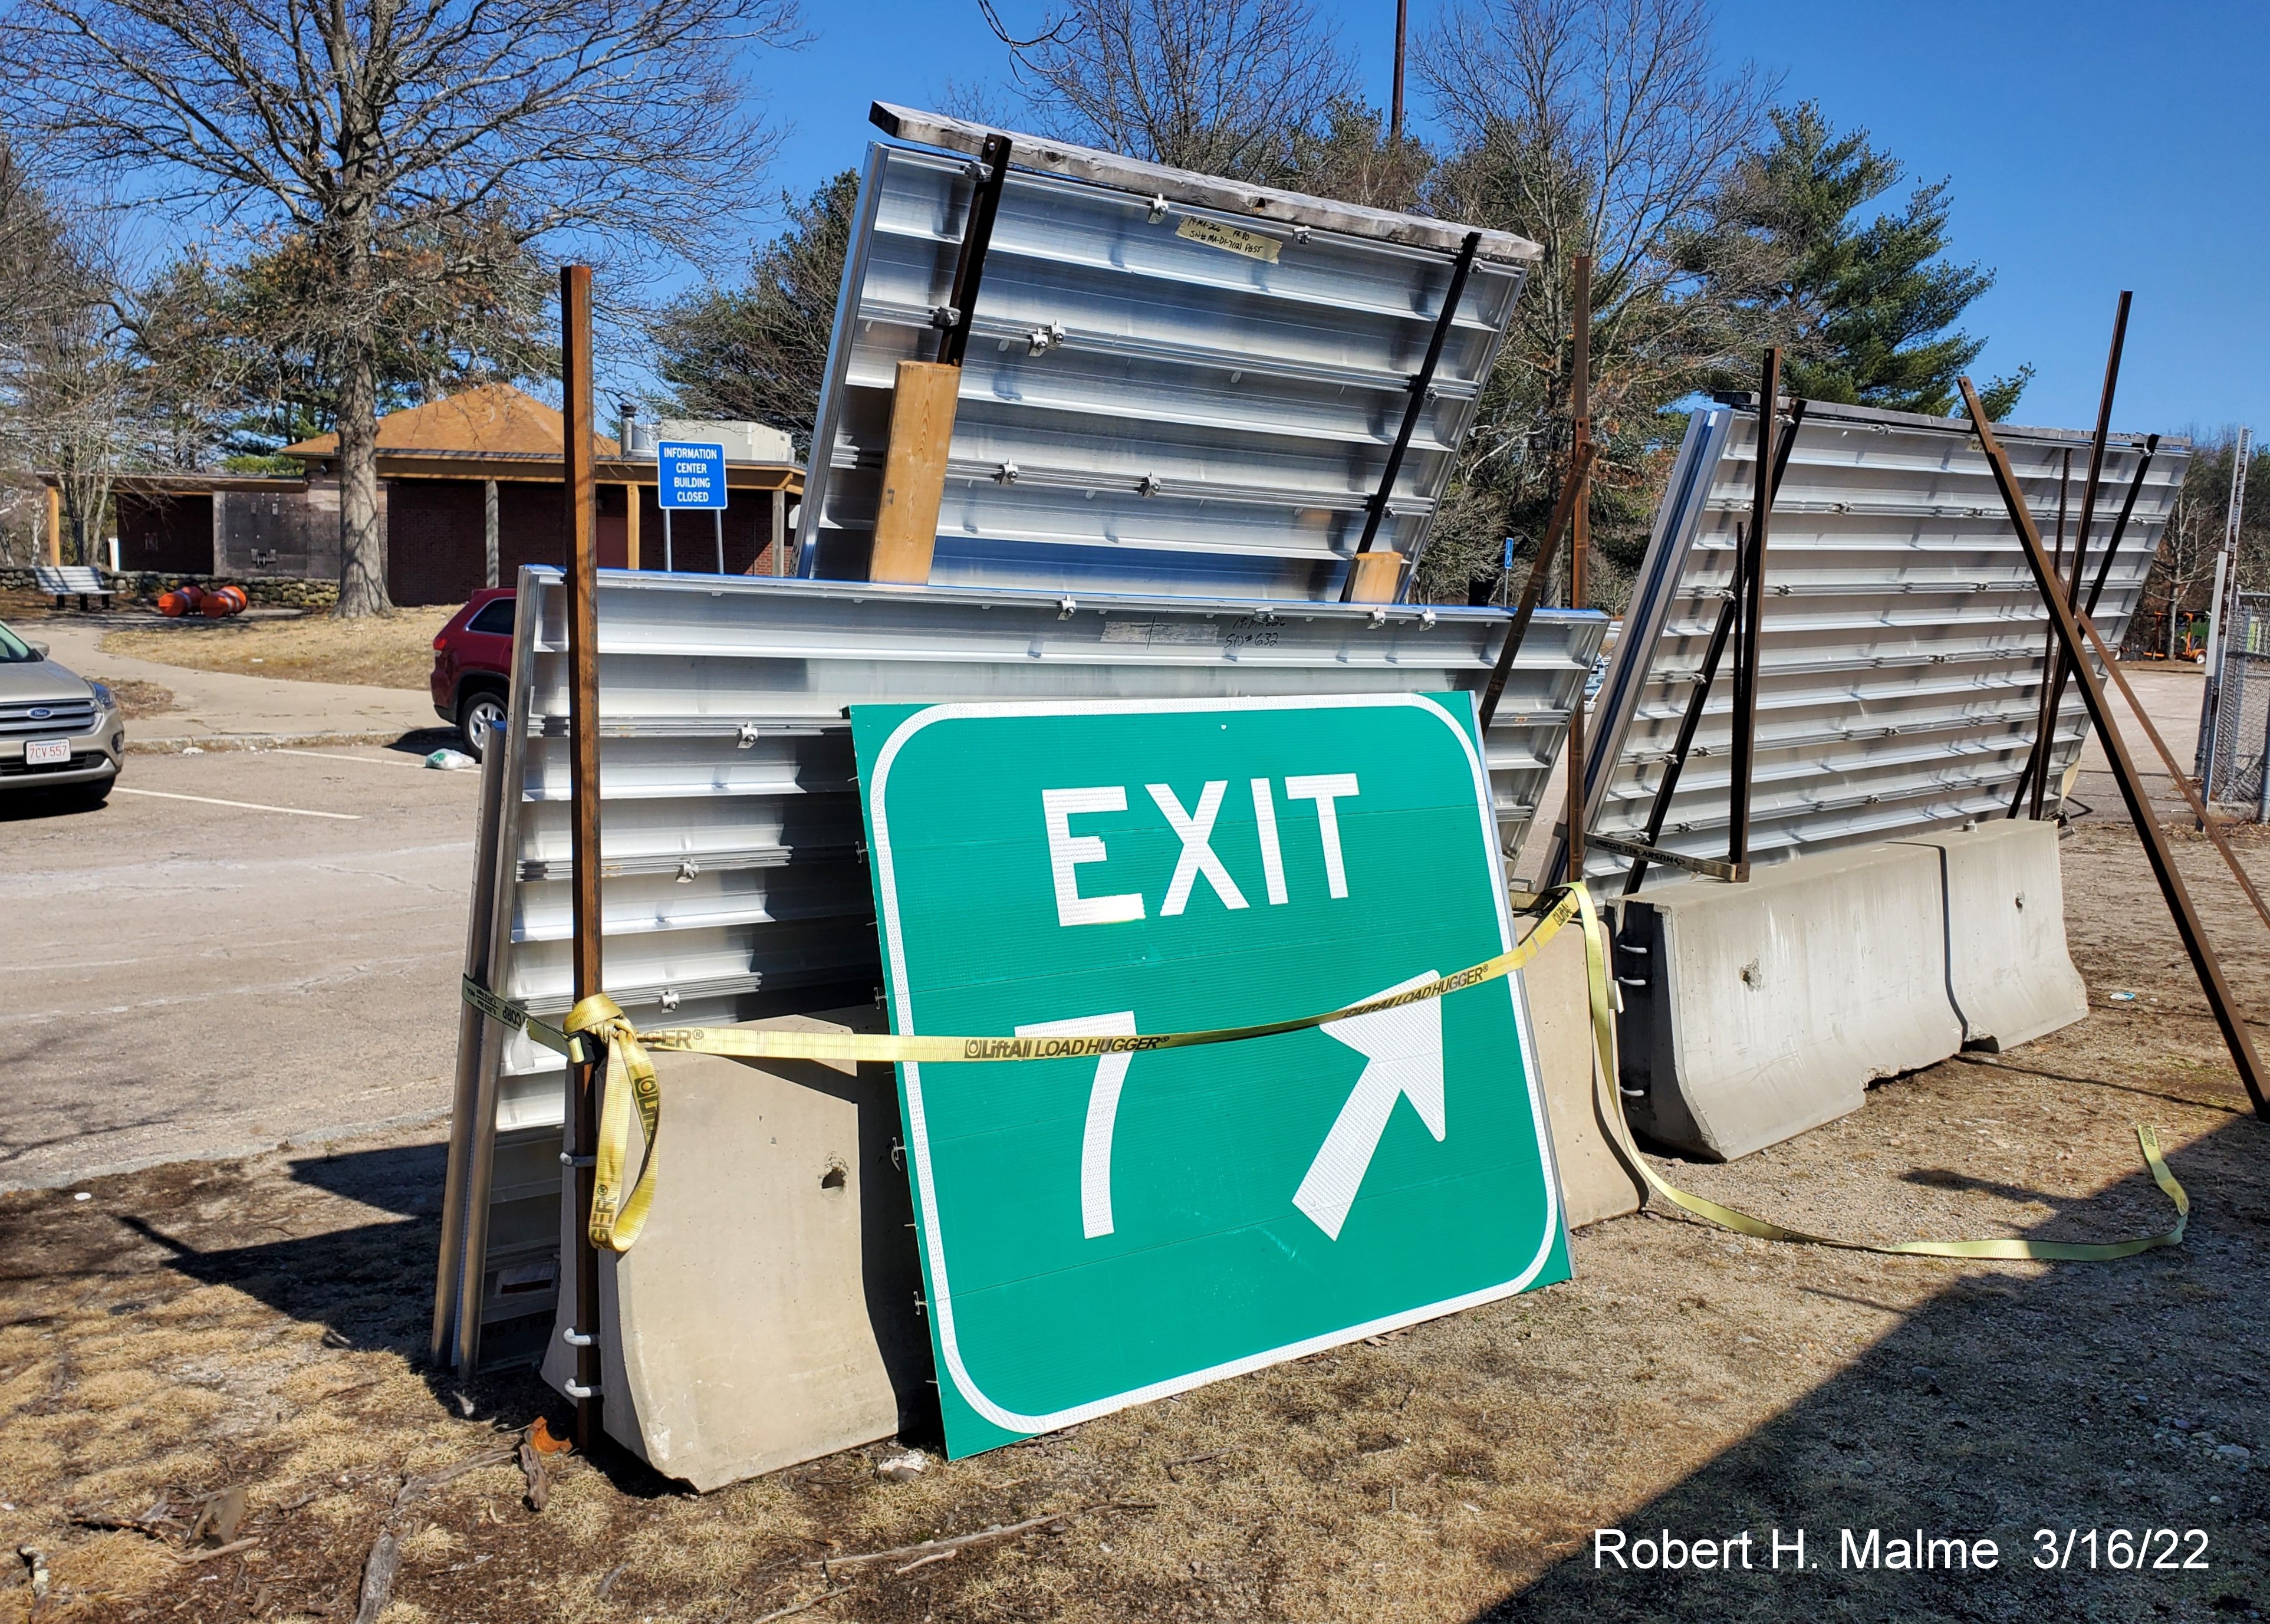 Image of a ground mounted gore sign for To MA 152 exit being stored at Mansfield Rest Area, March 2022